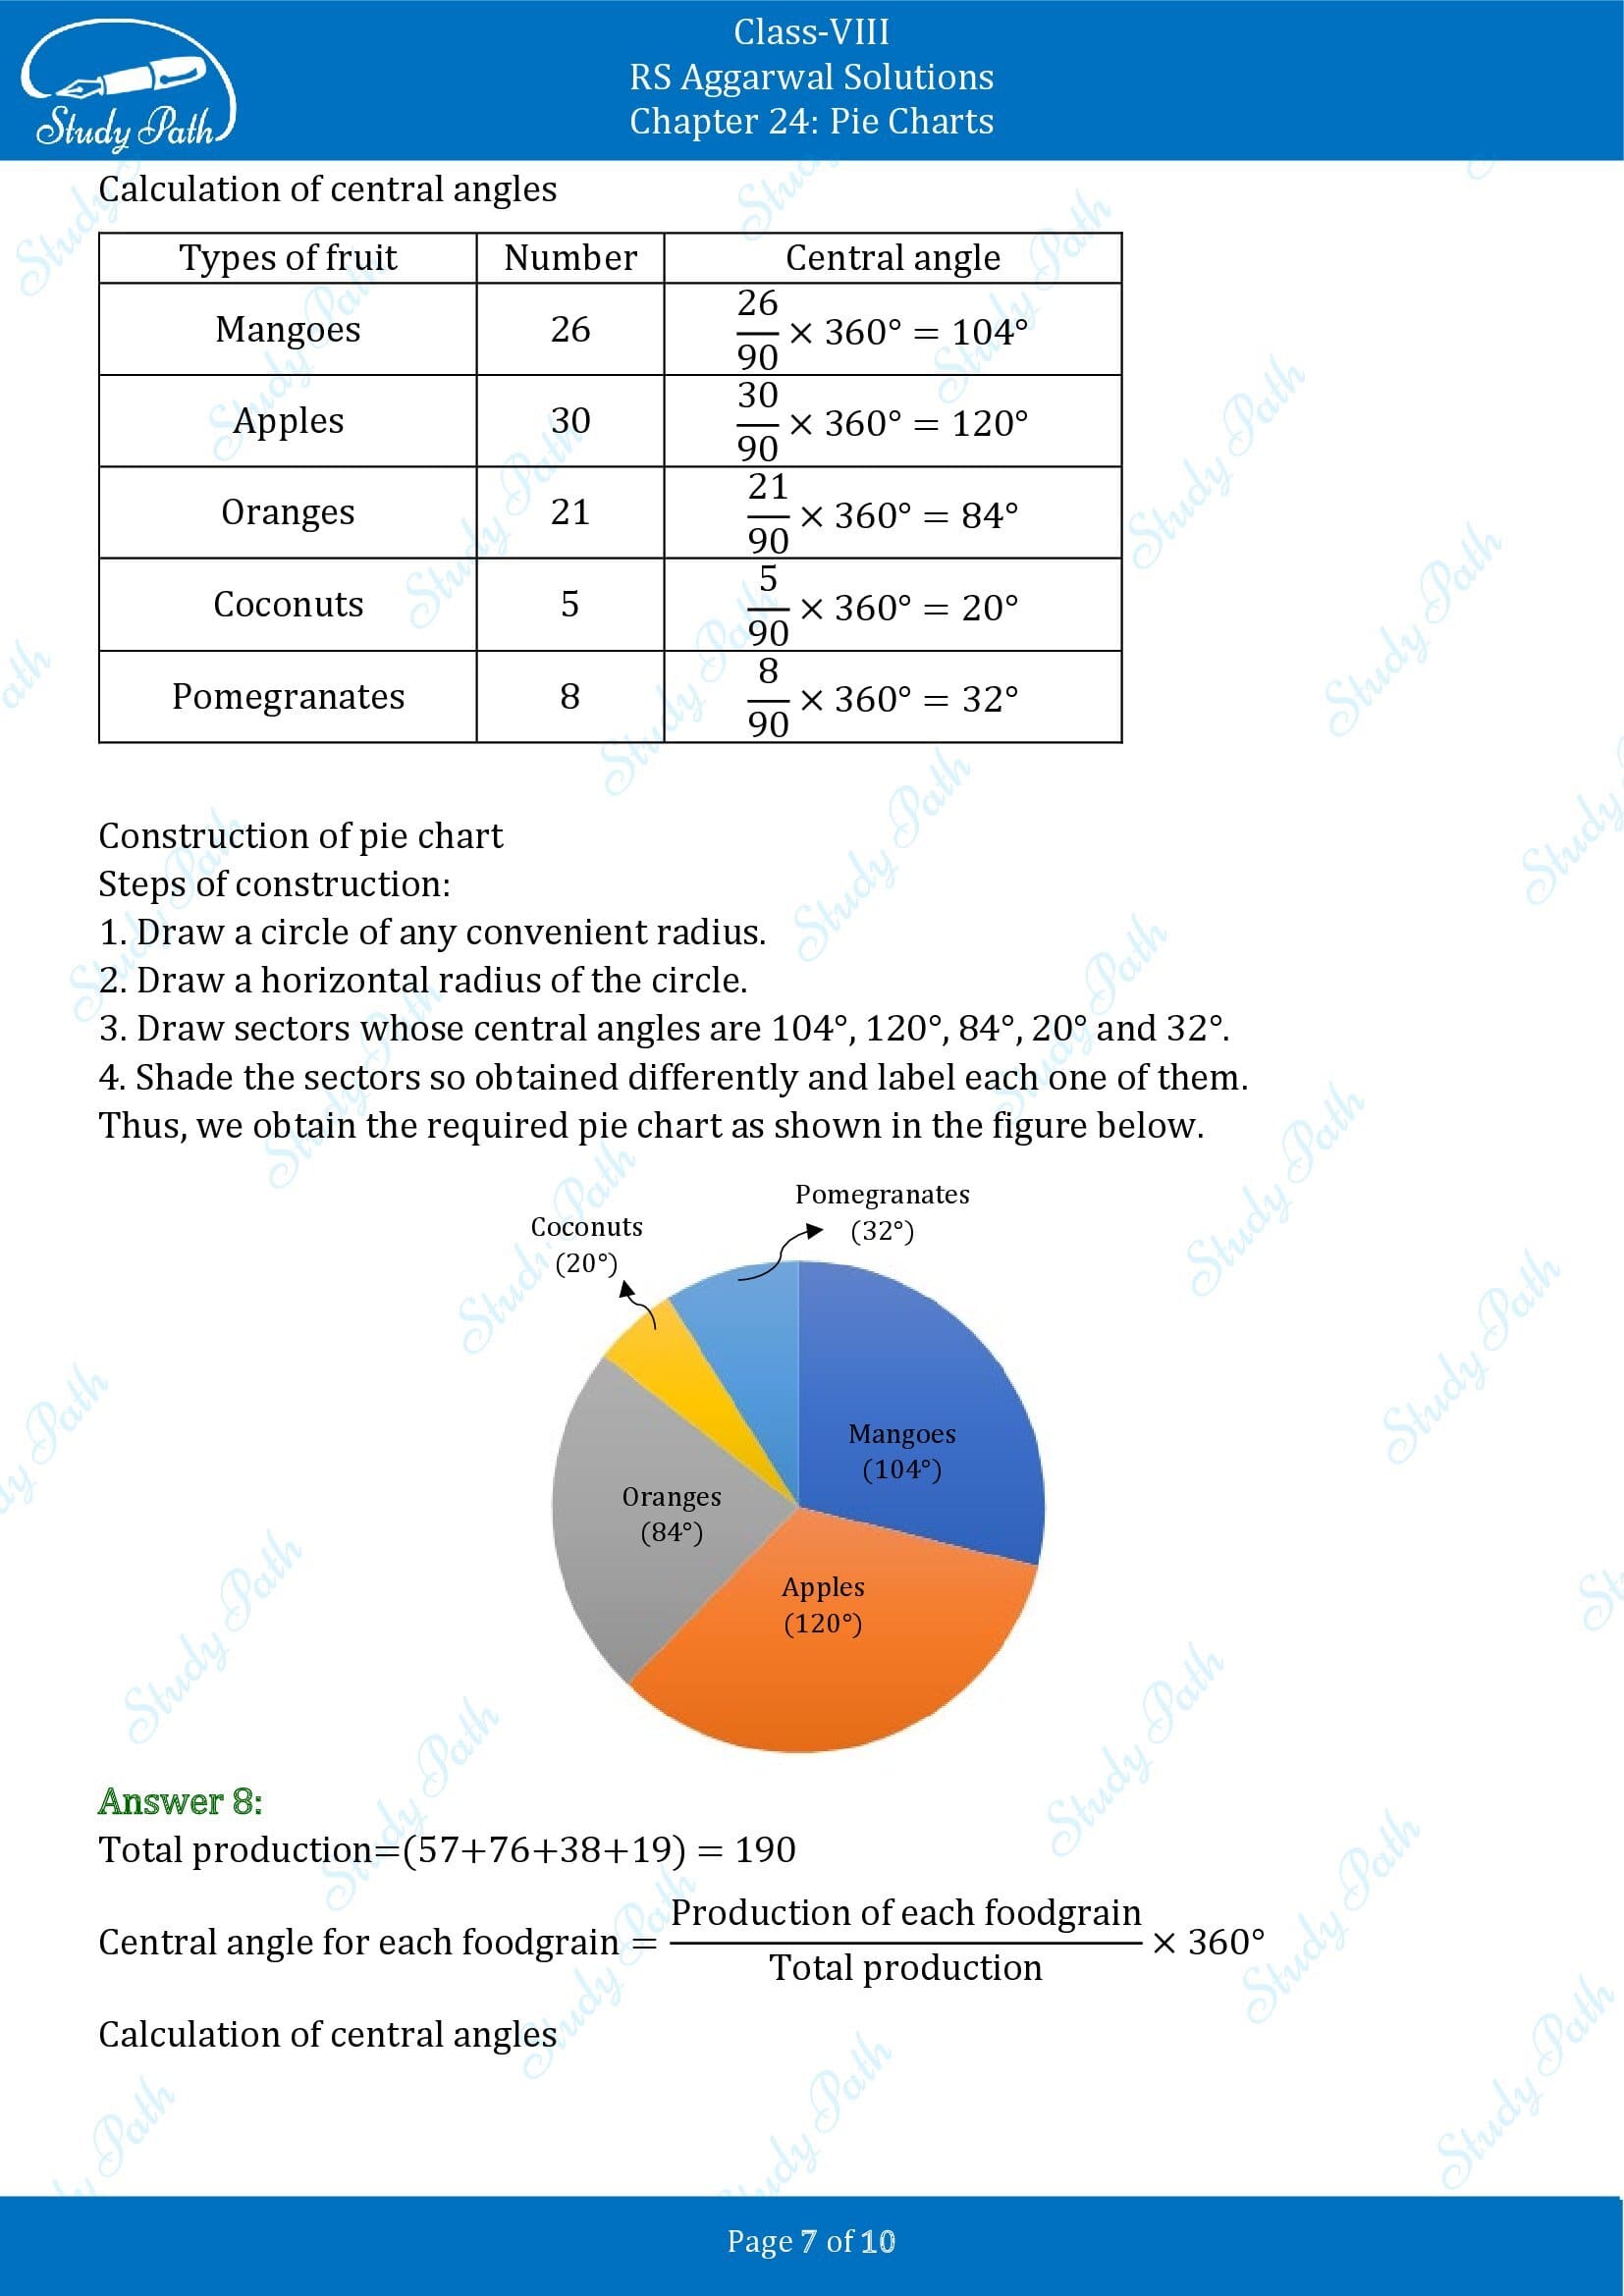 RS Aggarwal Solutions Class 8 Chapter 24 Pie Charts Exercise 24A 00007